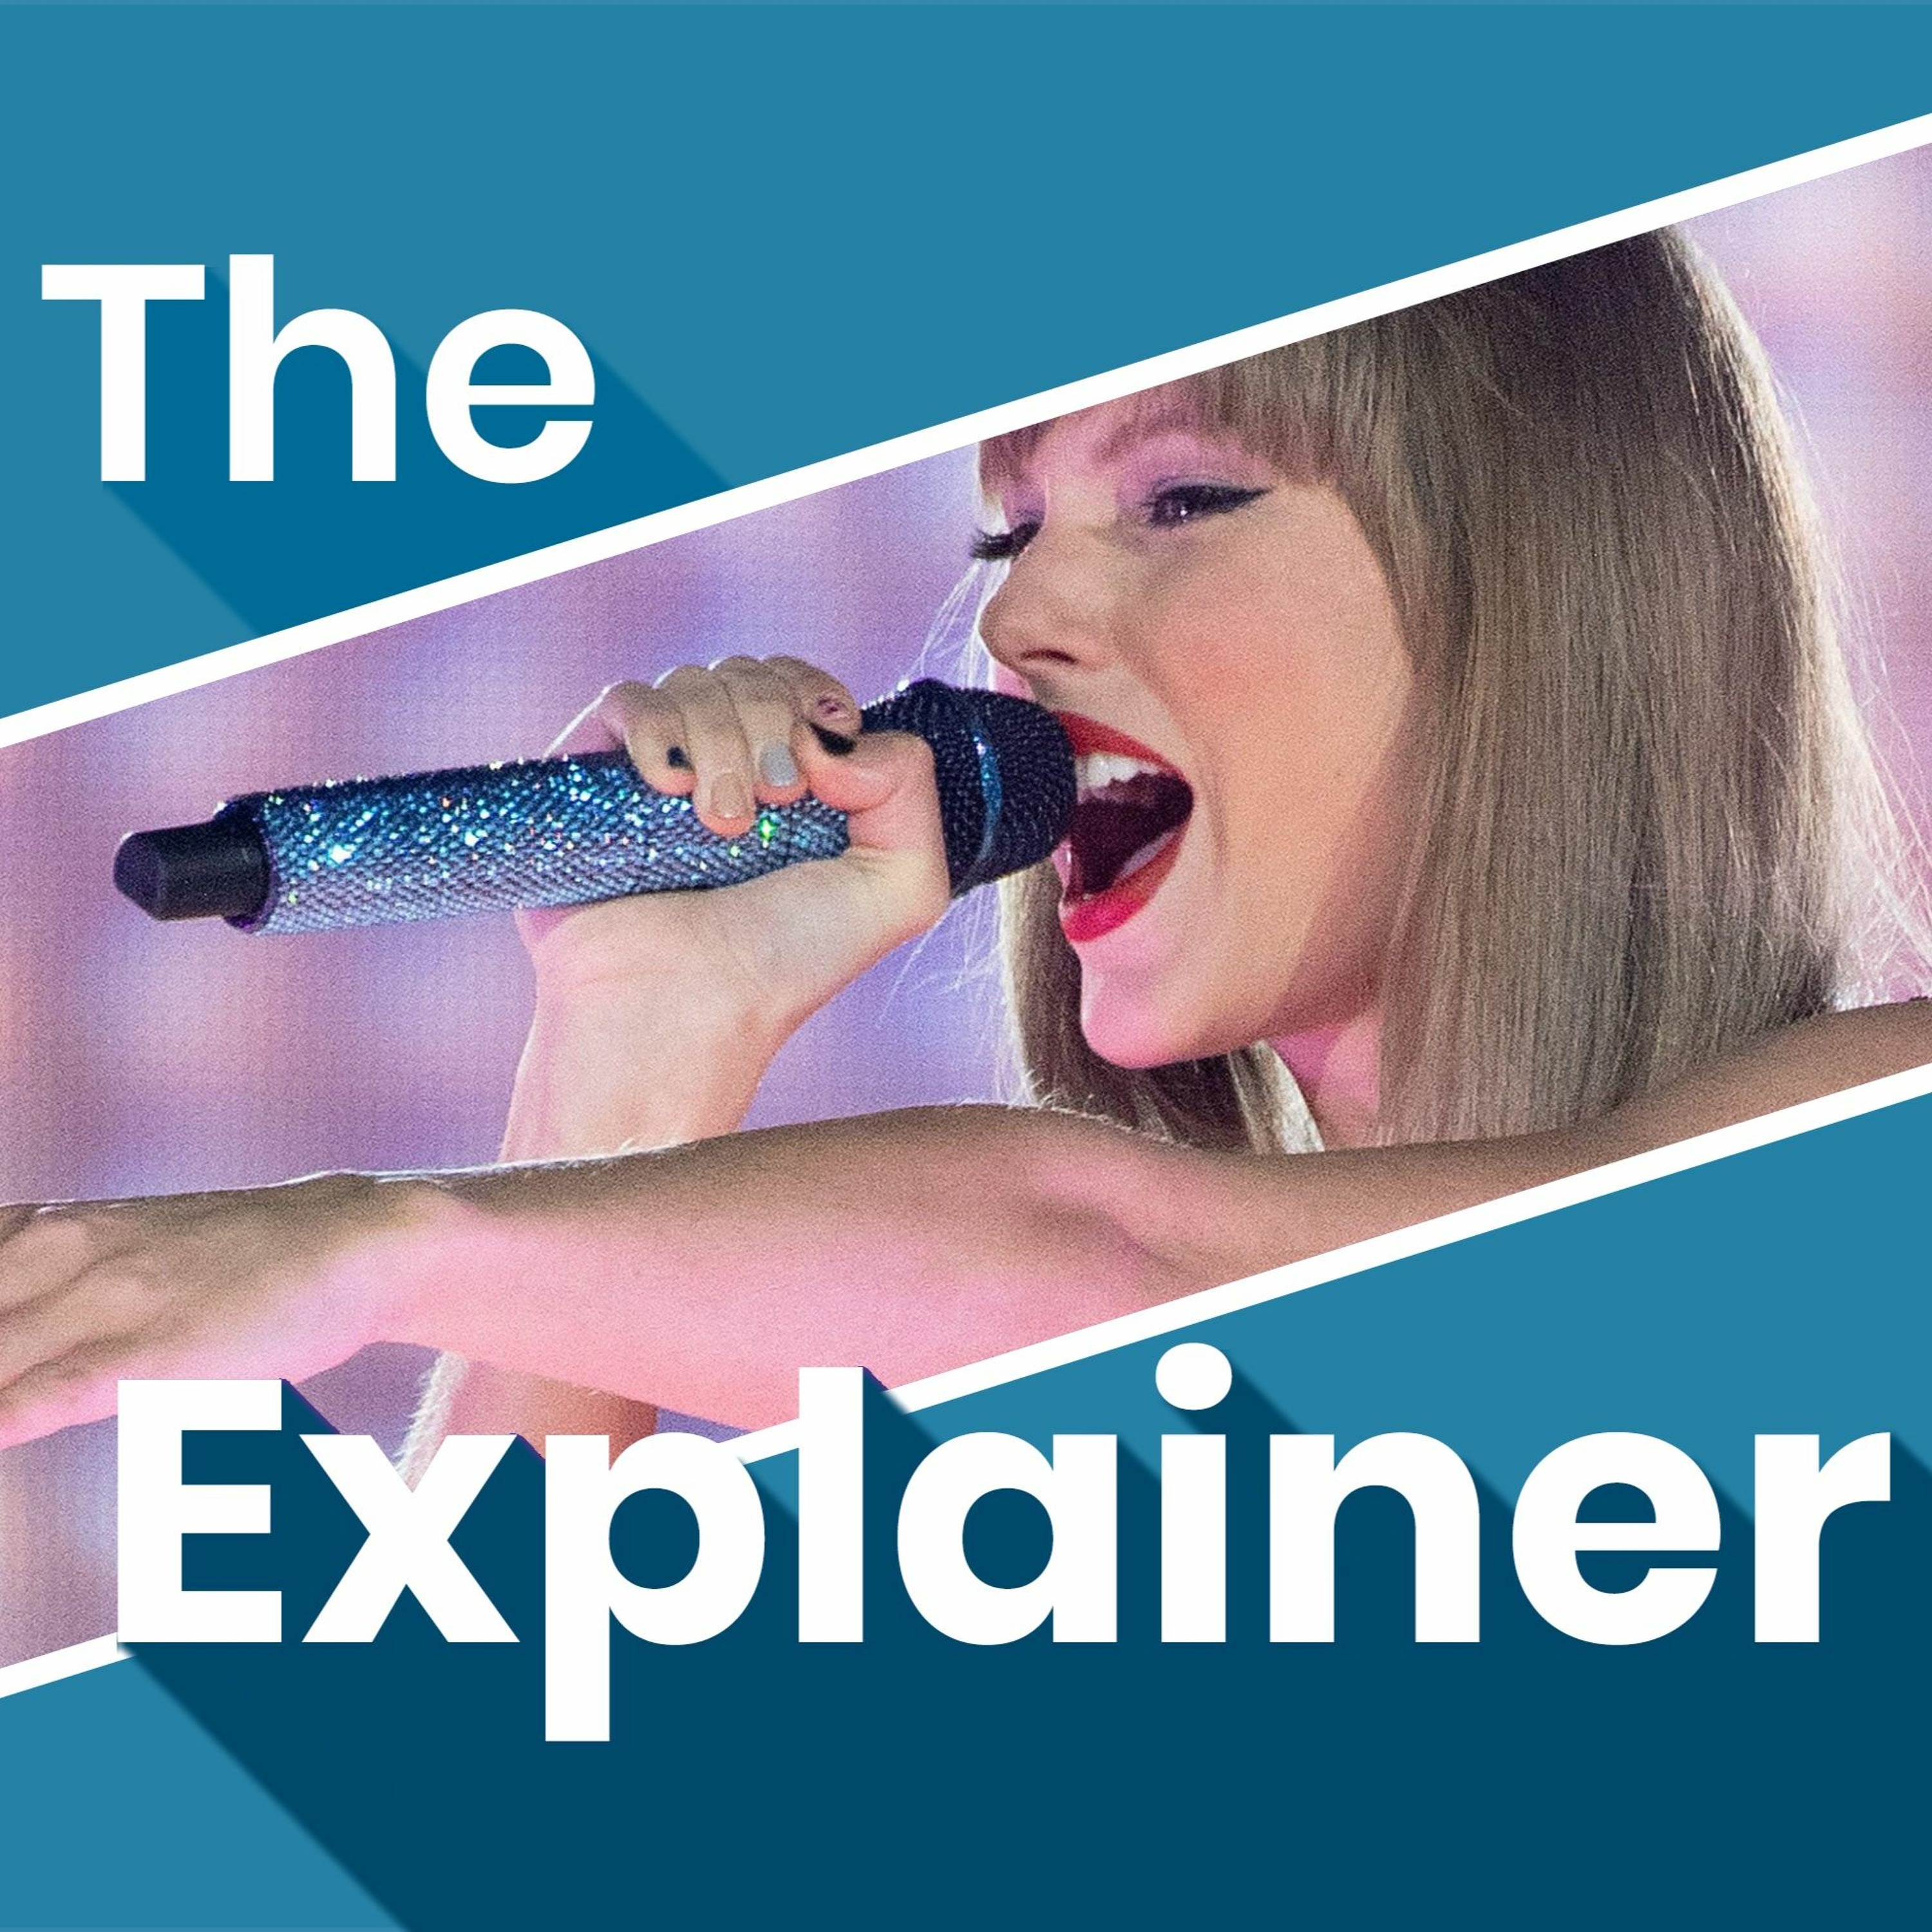 How has Taylor Swift become (arguably) the world’s biggest music star?